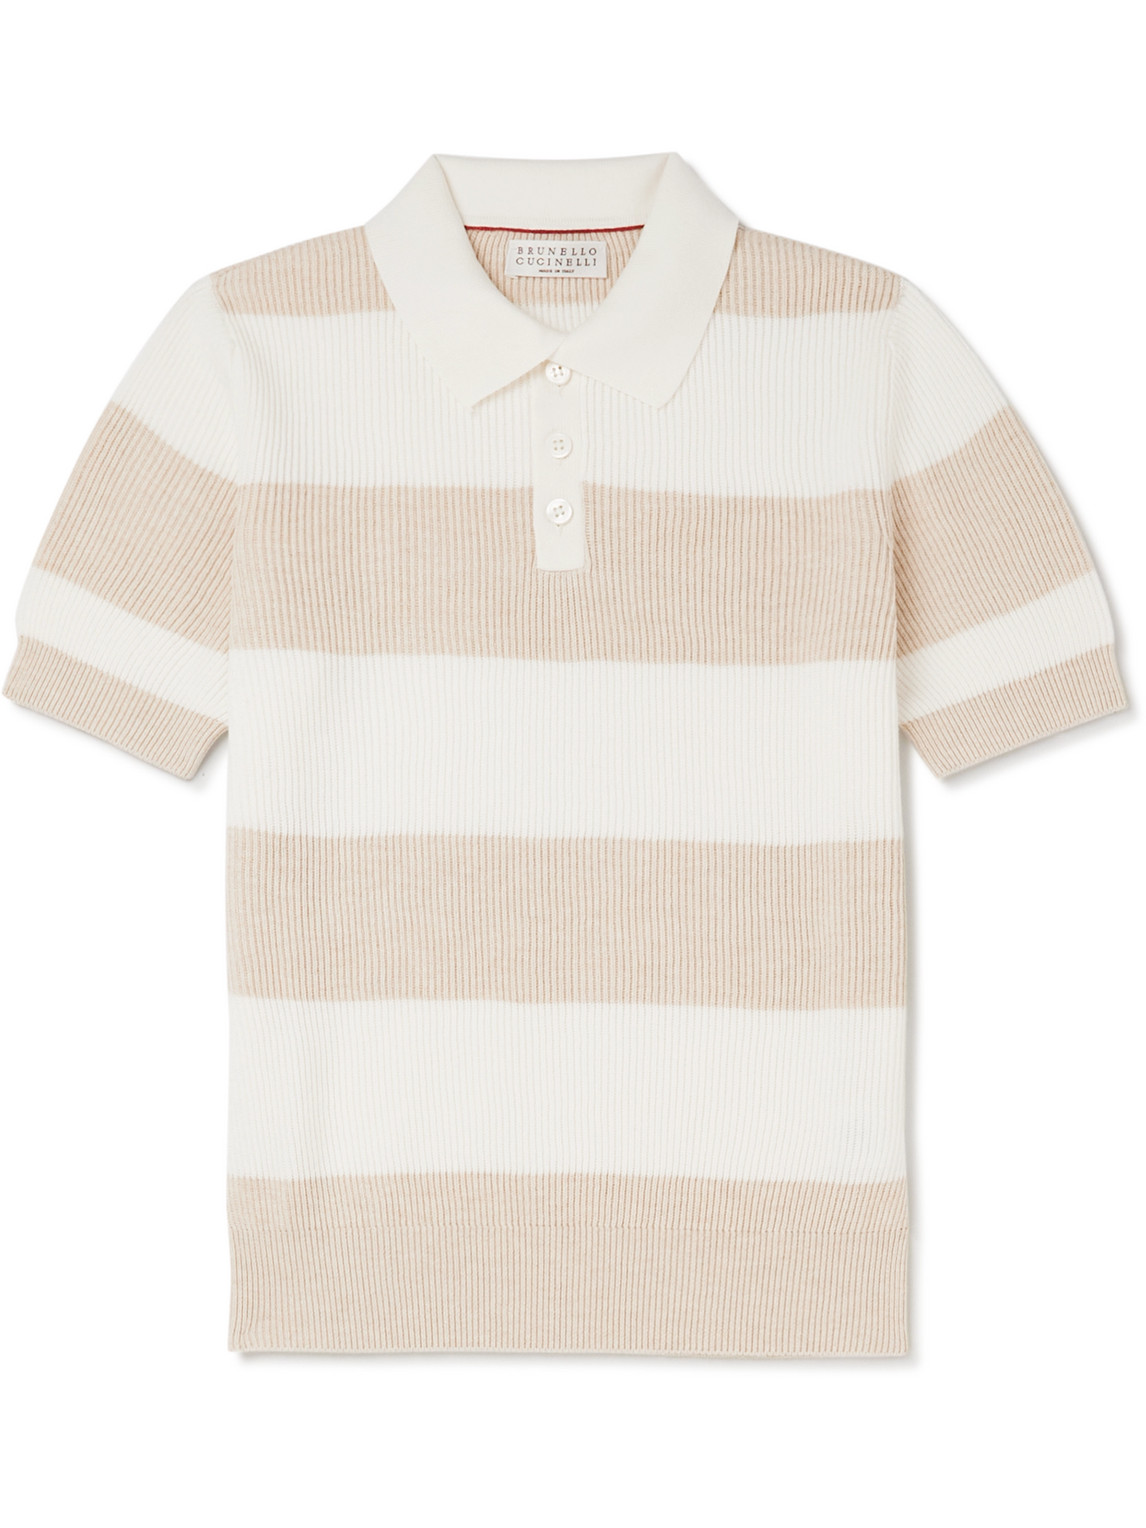 Ages 8-11 Striped Ribbed Cotton Polo Shirt